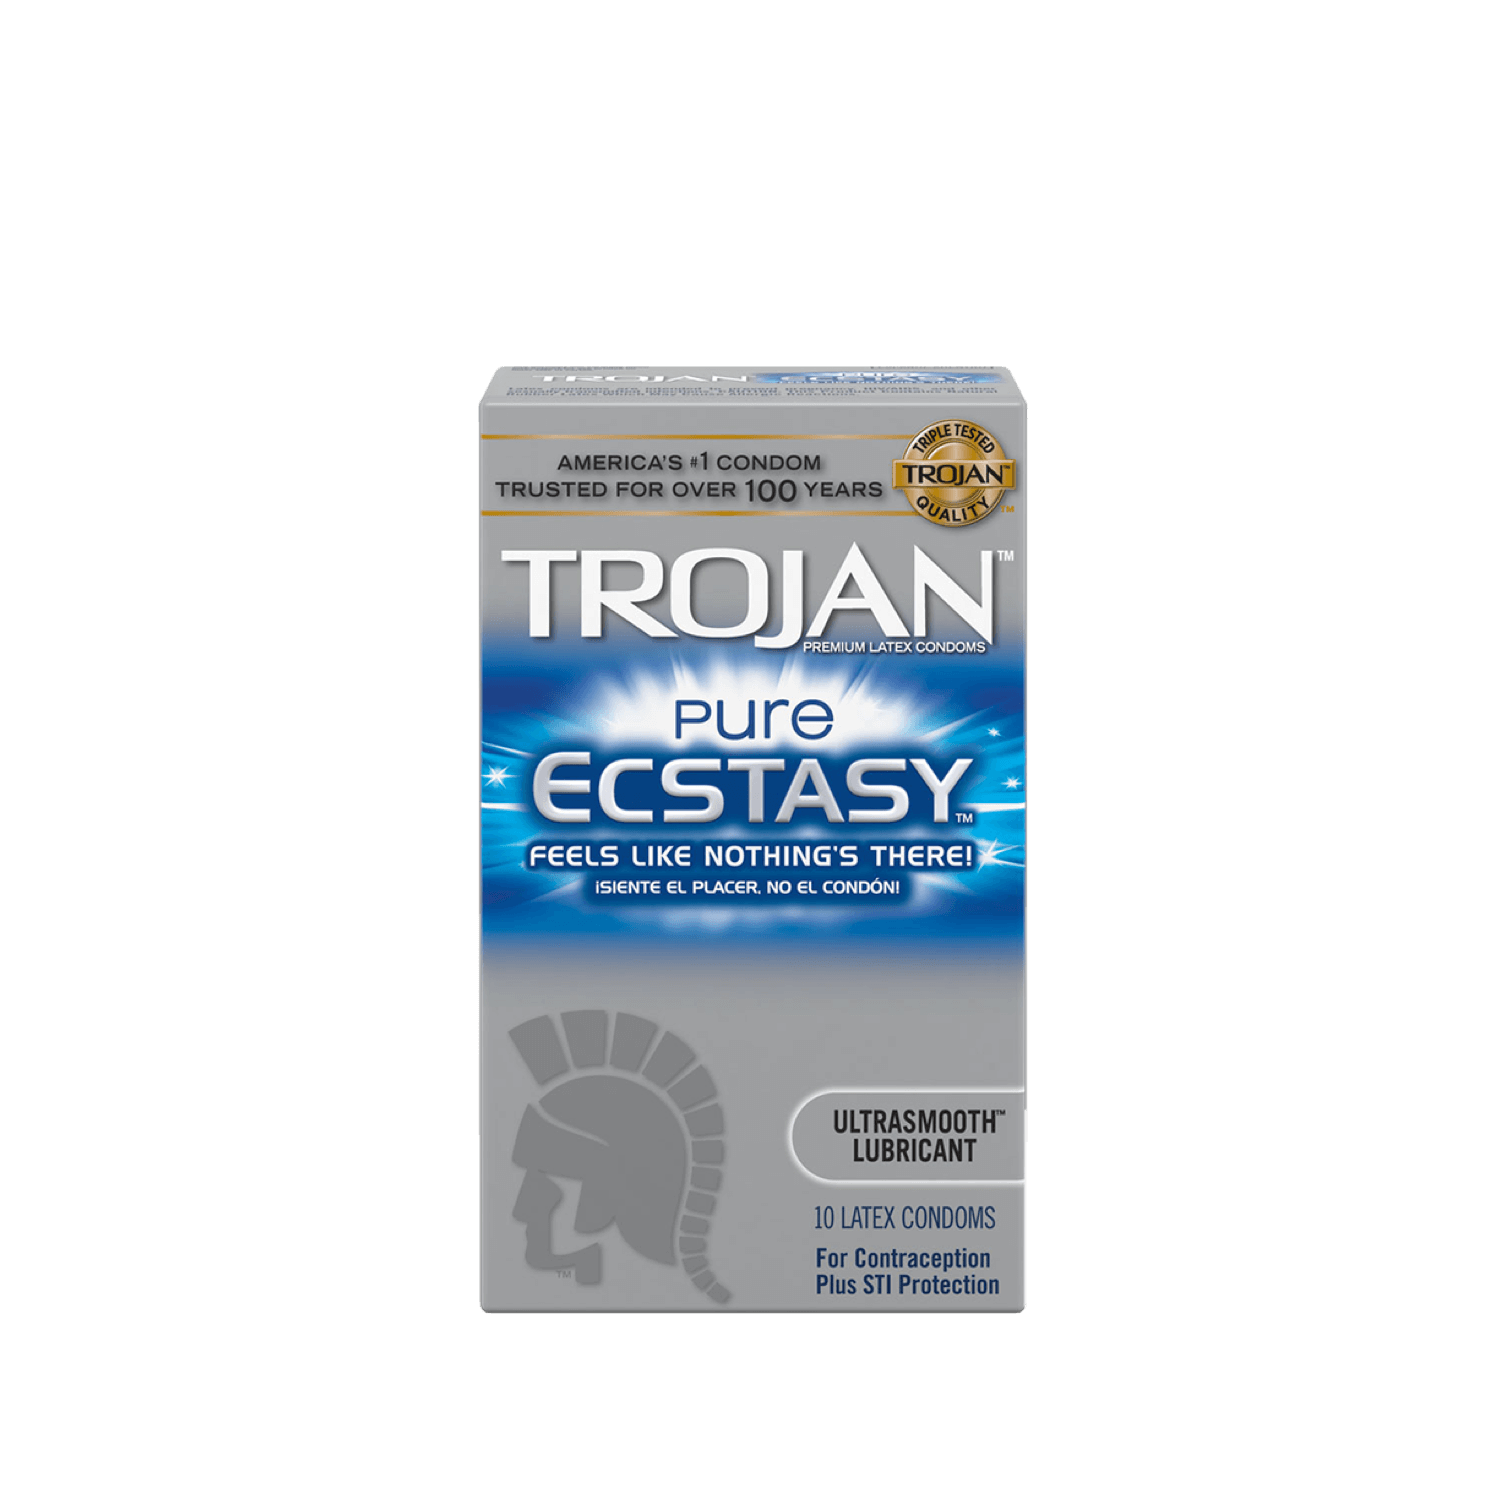 Trojan Pure Ecstasy Condoms with Ultrasmooth Lubricant.